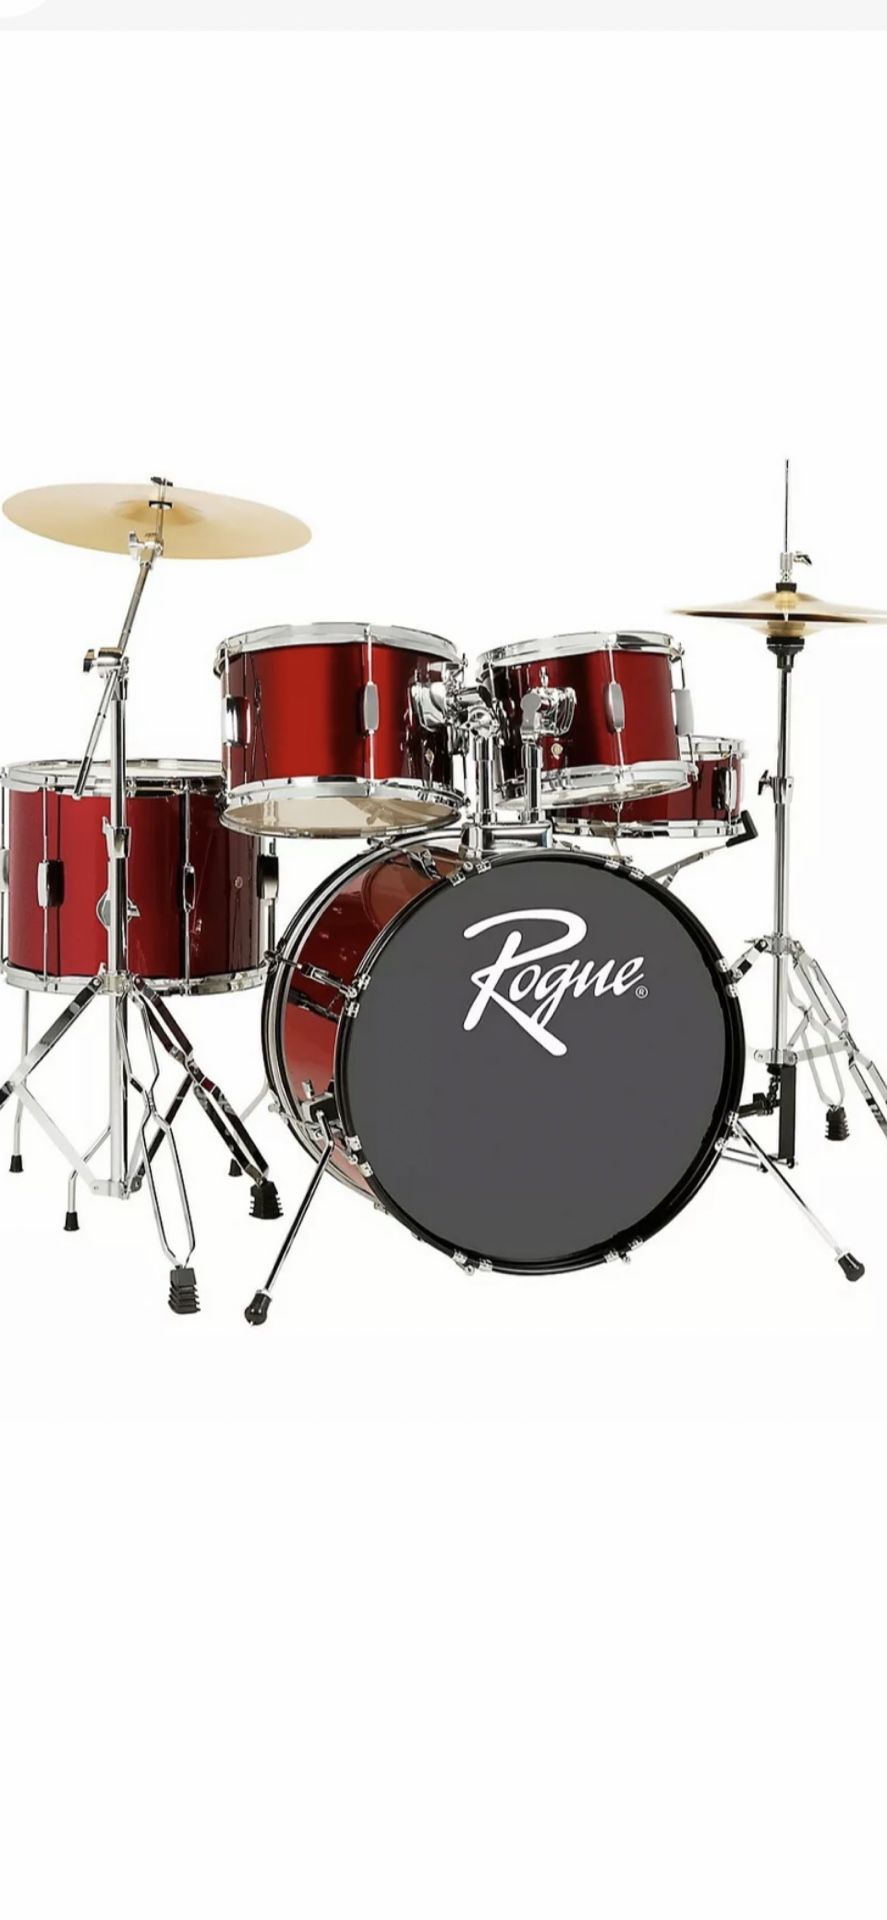 💥 Rogue Drum Set Like New Ages 6-16